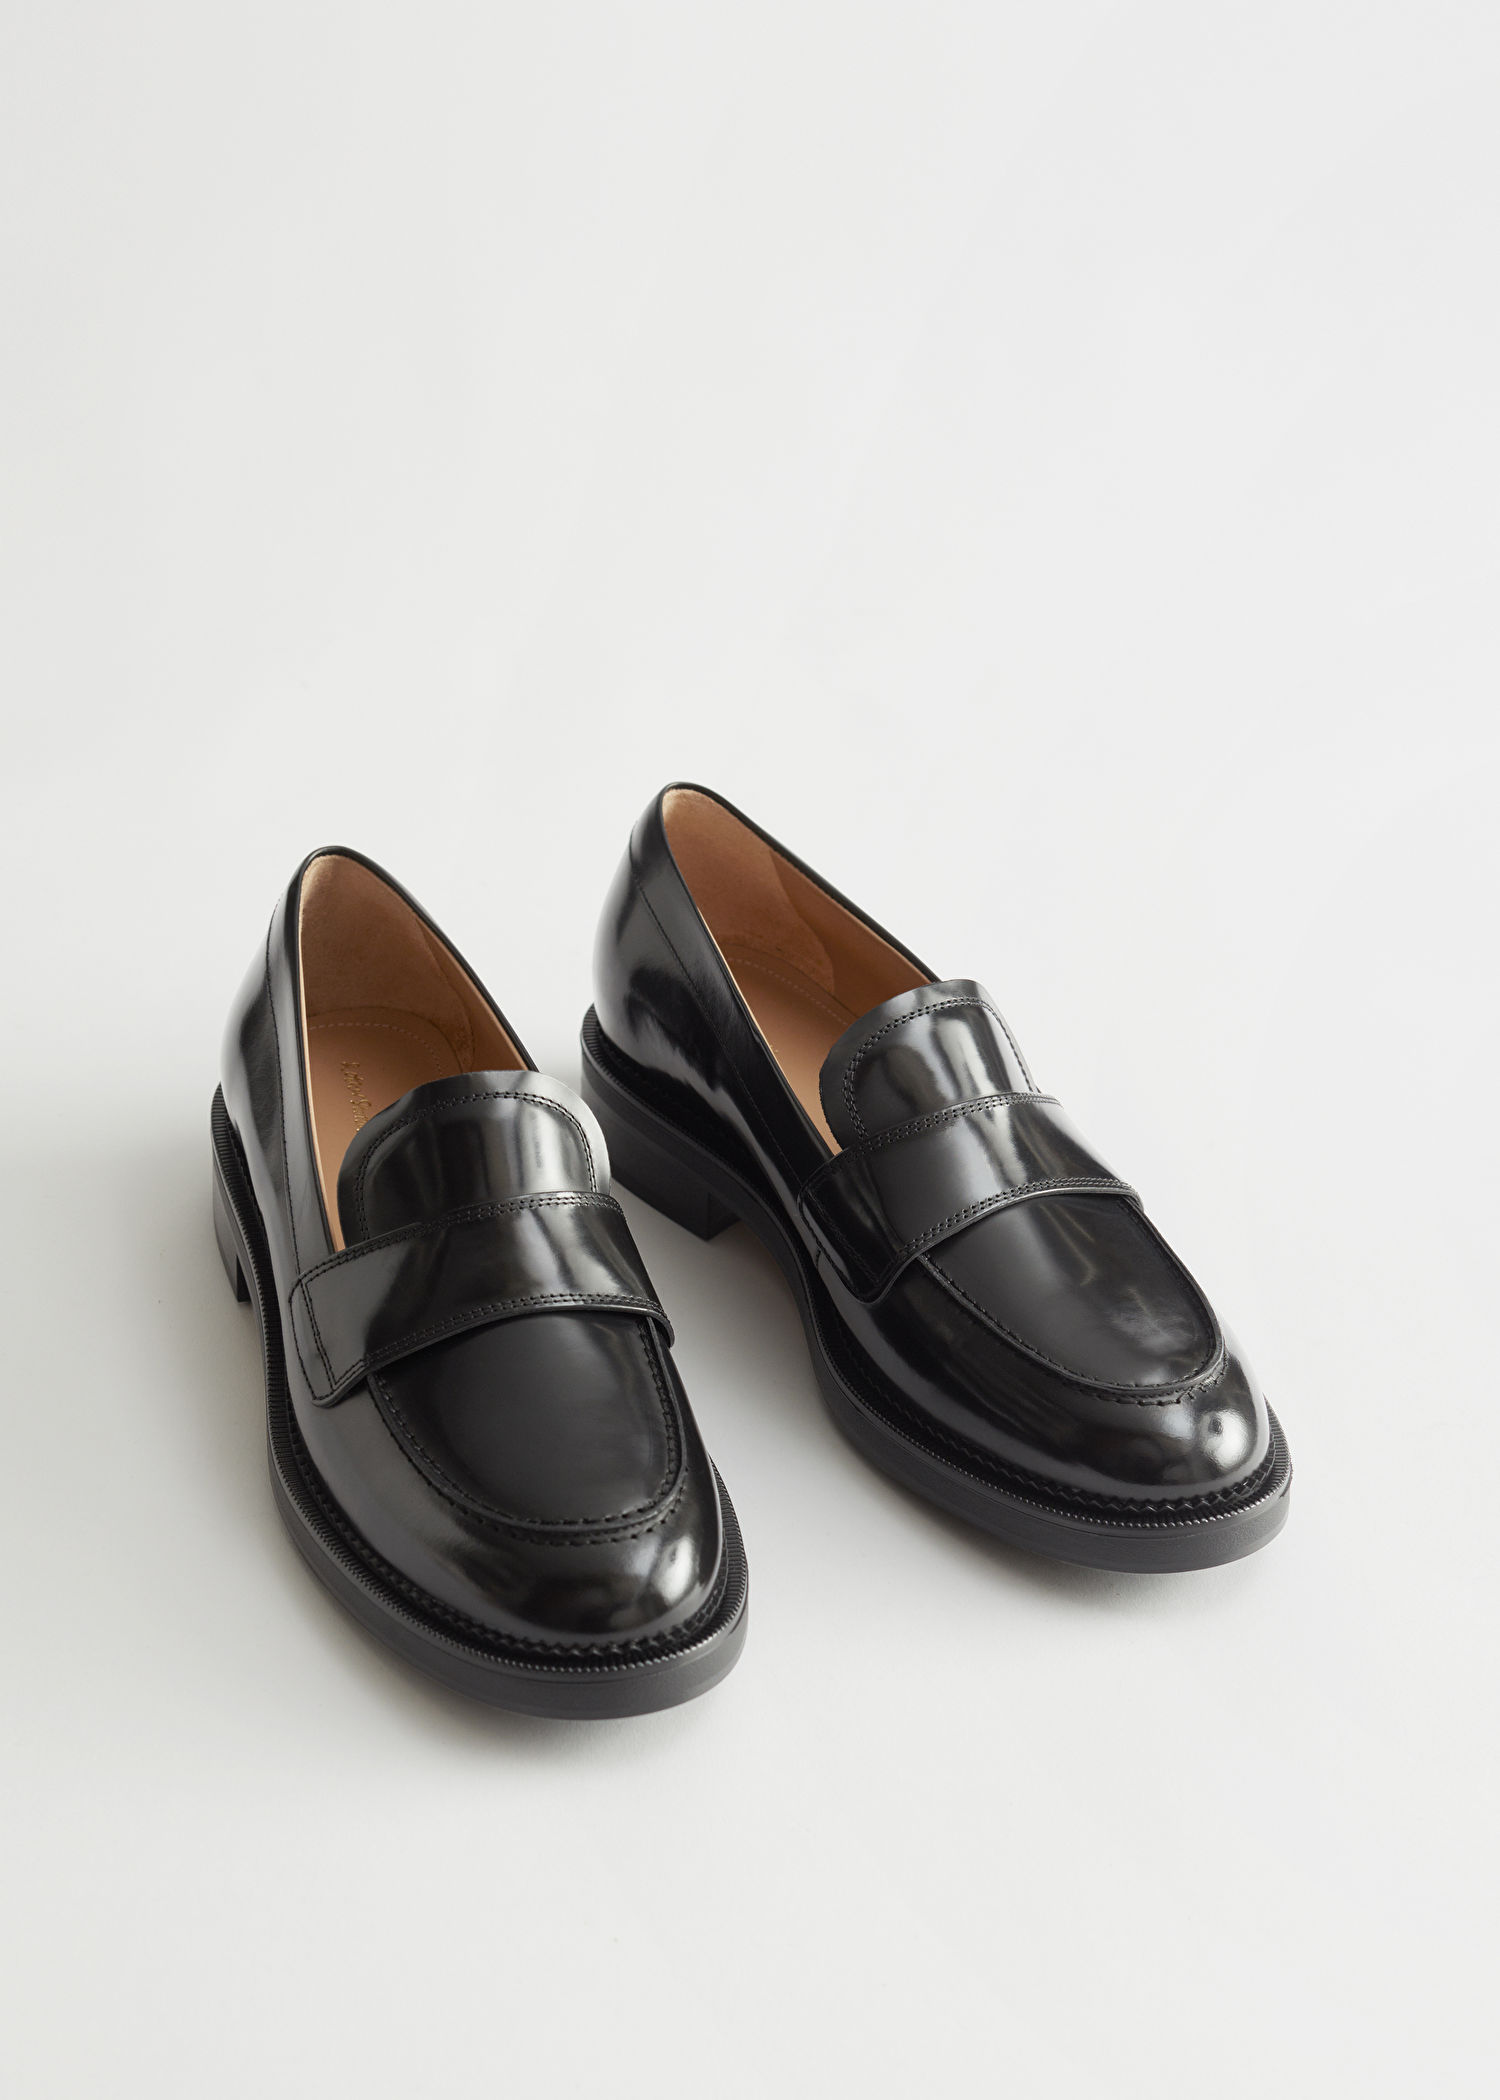 Leather Penny Loafers, now 65